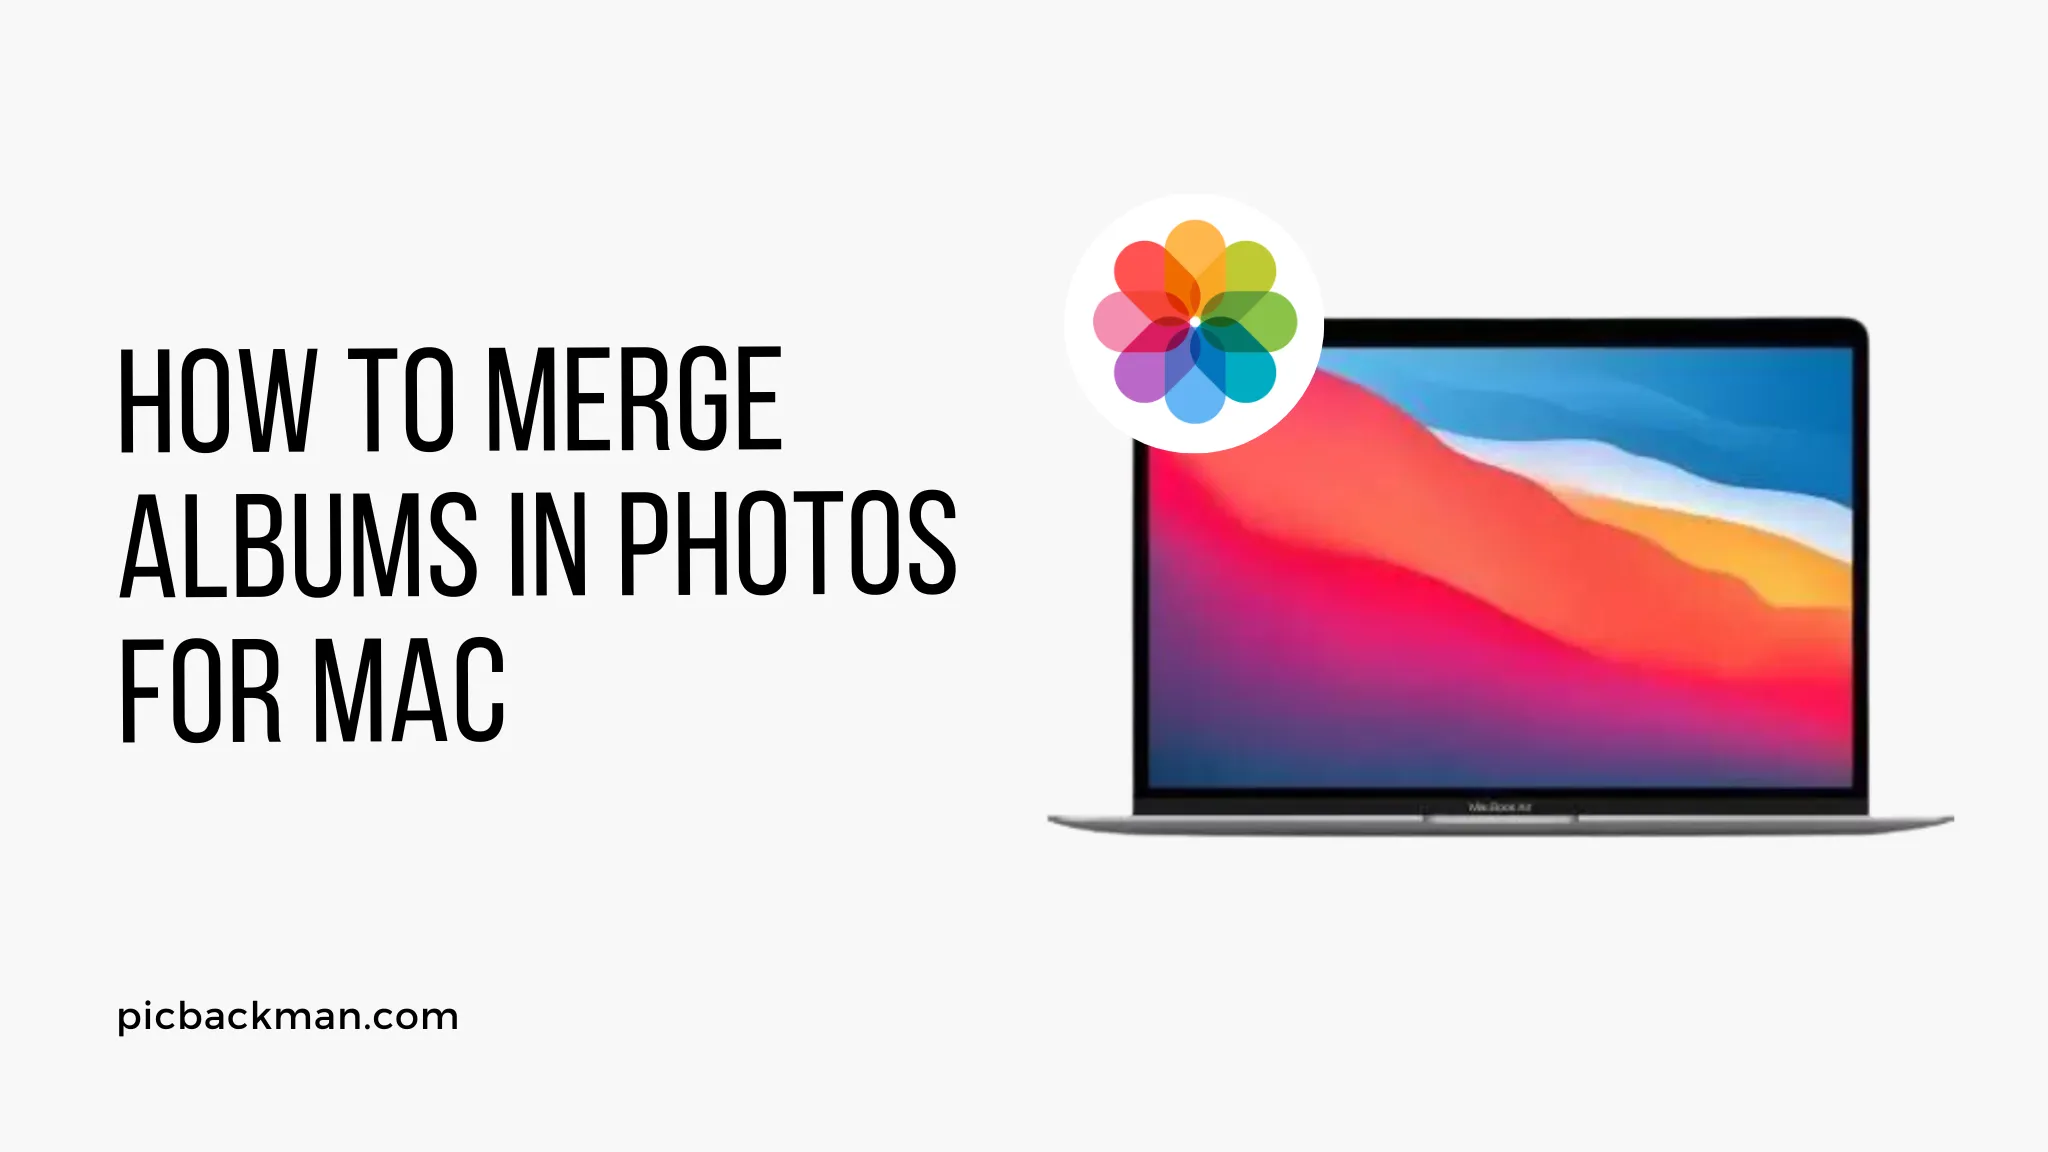 How to Merge Albums in Photos for Mac